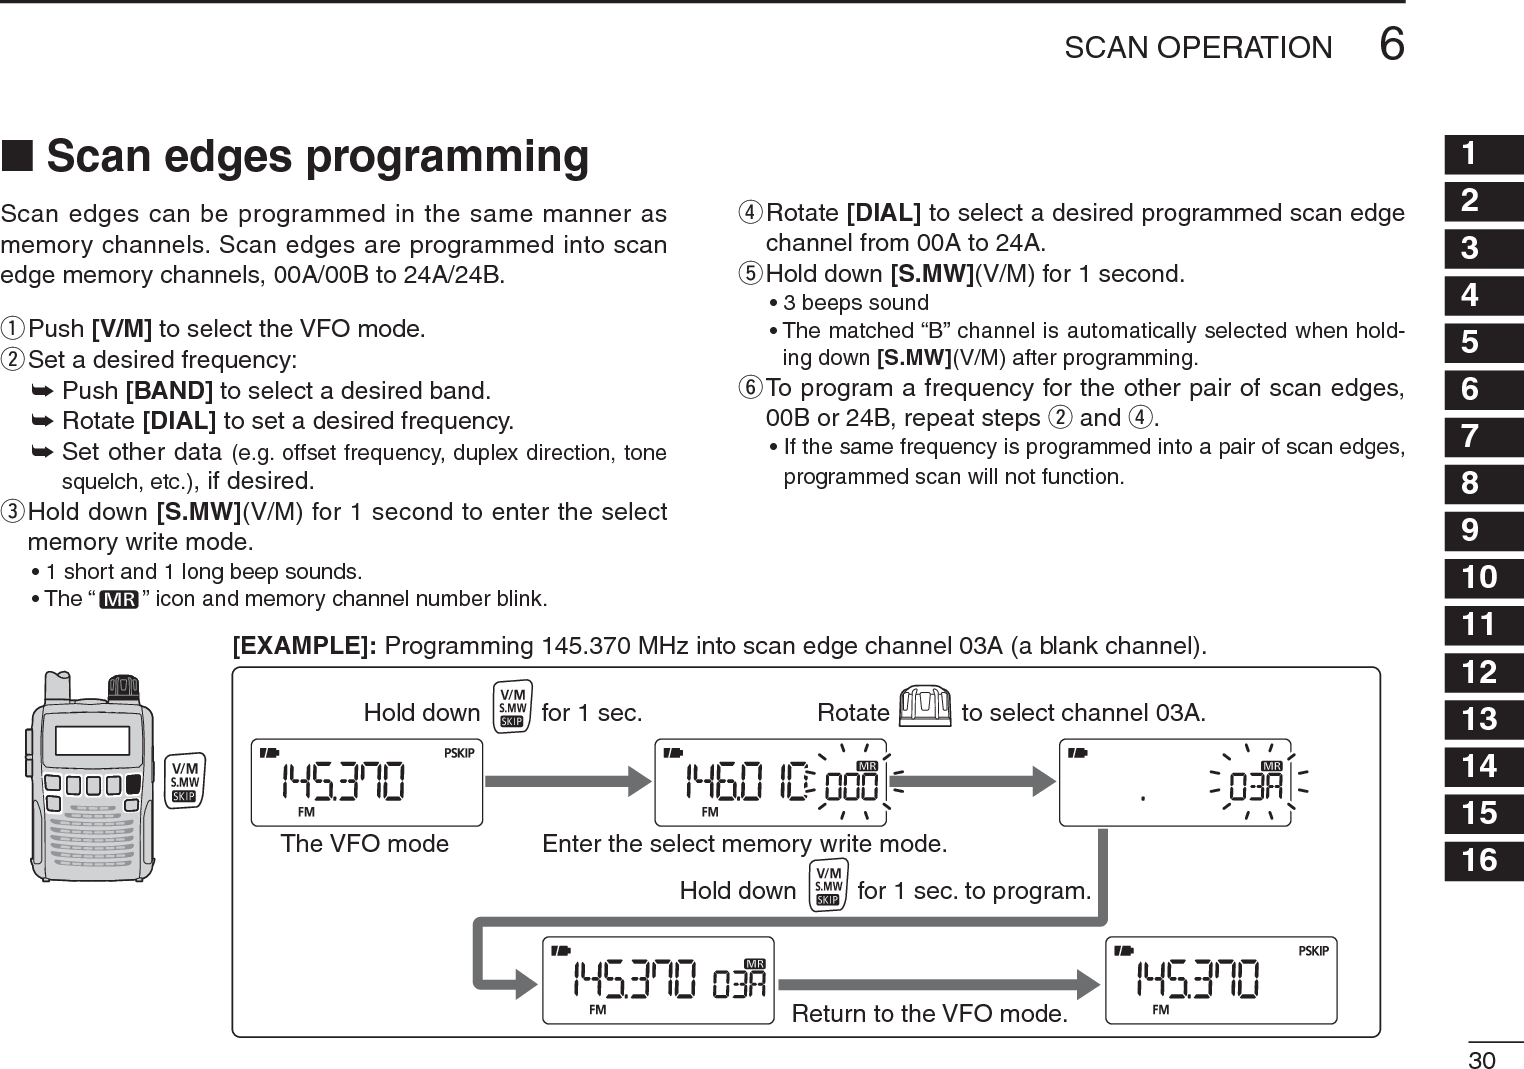 306SCAN OPERATION12345678910111213141516N Scan edges programmingScan edges can be programmed in the same manner as memory channels. Scan edges are programmed into scan edge memory channels, 00A/00B to 24A/24B.qPush [V/M] to select the VFO mode.wSet a desired frequency:± Push [BAND] to select a desired band.± Rotate [DIAL] to set a desired frequency.±Set other data (e.g. offset frequency, duplex direction, tone squelch, etc.), if desired.e  Hold down [S.MW](V/M) for 1 second to enter the select memory write mode.• 1 short and 1 long beep sounds.• The “ ” icon and memory channel number blink.r  Rotate [DIAL] to select a desired programmed scan edge channel from 00A to 24A.tHold down [S.MW](V/M) for 1 second.• 3 beeps sound• The matched “B” channel is automatically selected when hold-ing down [S.MW](V/M) after programming.y  To program a frequency for the other pair of scan edges, 00B or 24B, repeat steps w and r.• If the same frequency is programmed into a pair of scan edges, programmed scan will not function.RotateHold down for 1 sec. to select channel 03A.Hold down for 1 sec. to program.The VFO mode Enter the select memory write mode.Return to the VFO mode.[EXAMPLE]: Programming 145.370 MHz into scan edge channel 03A (a blank channel).